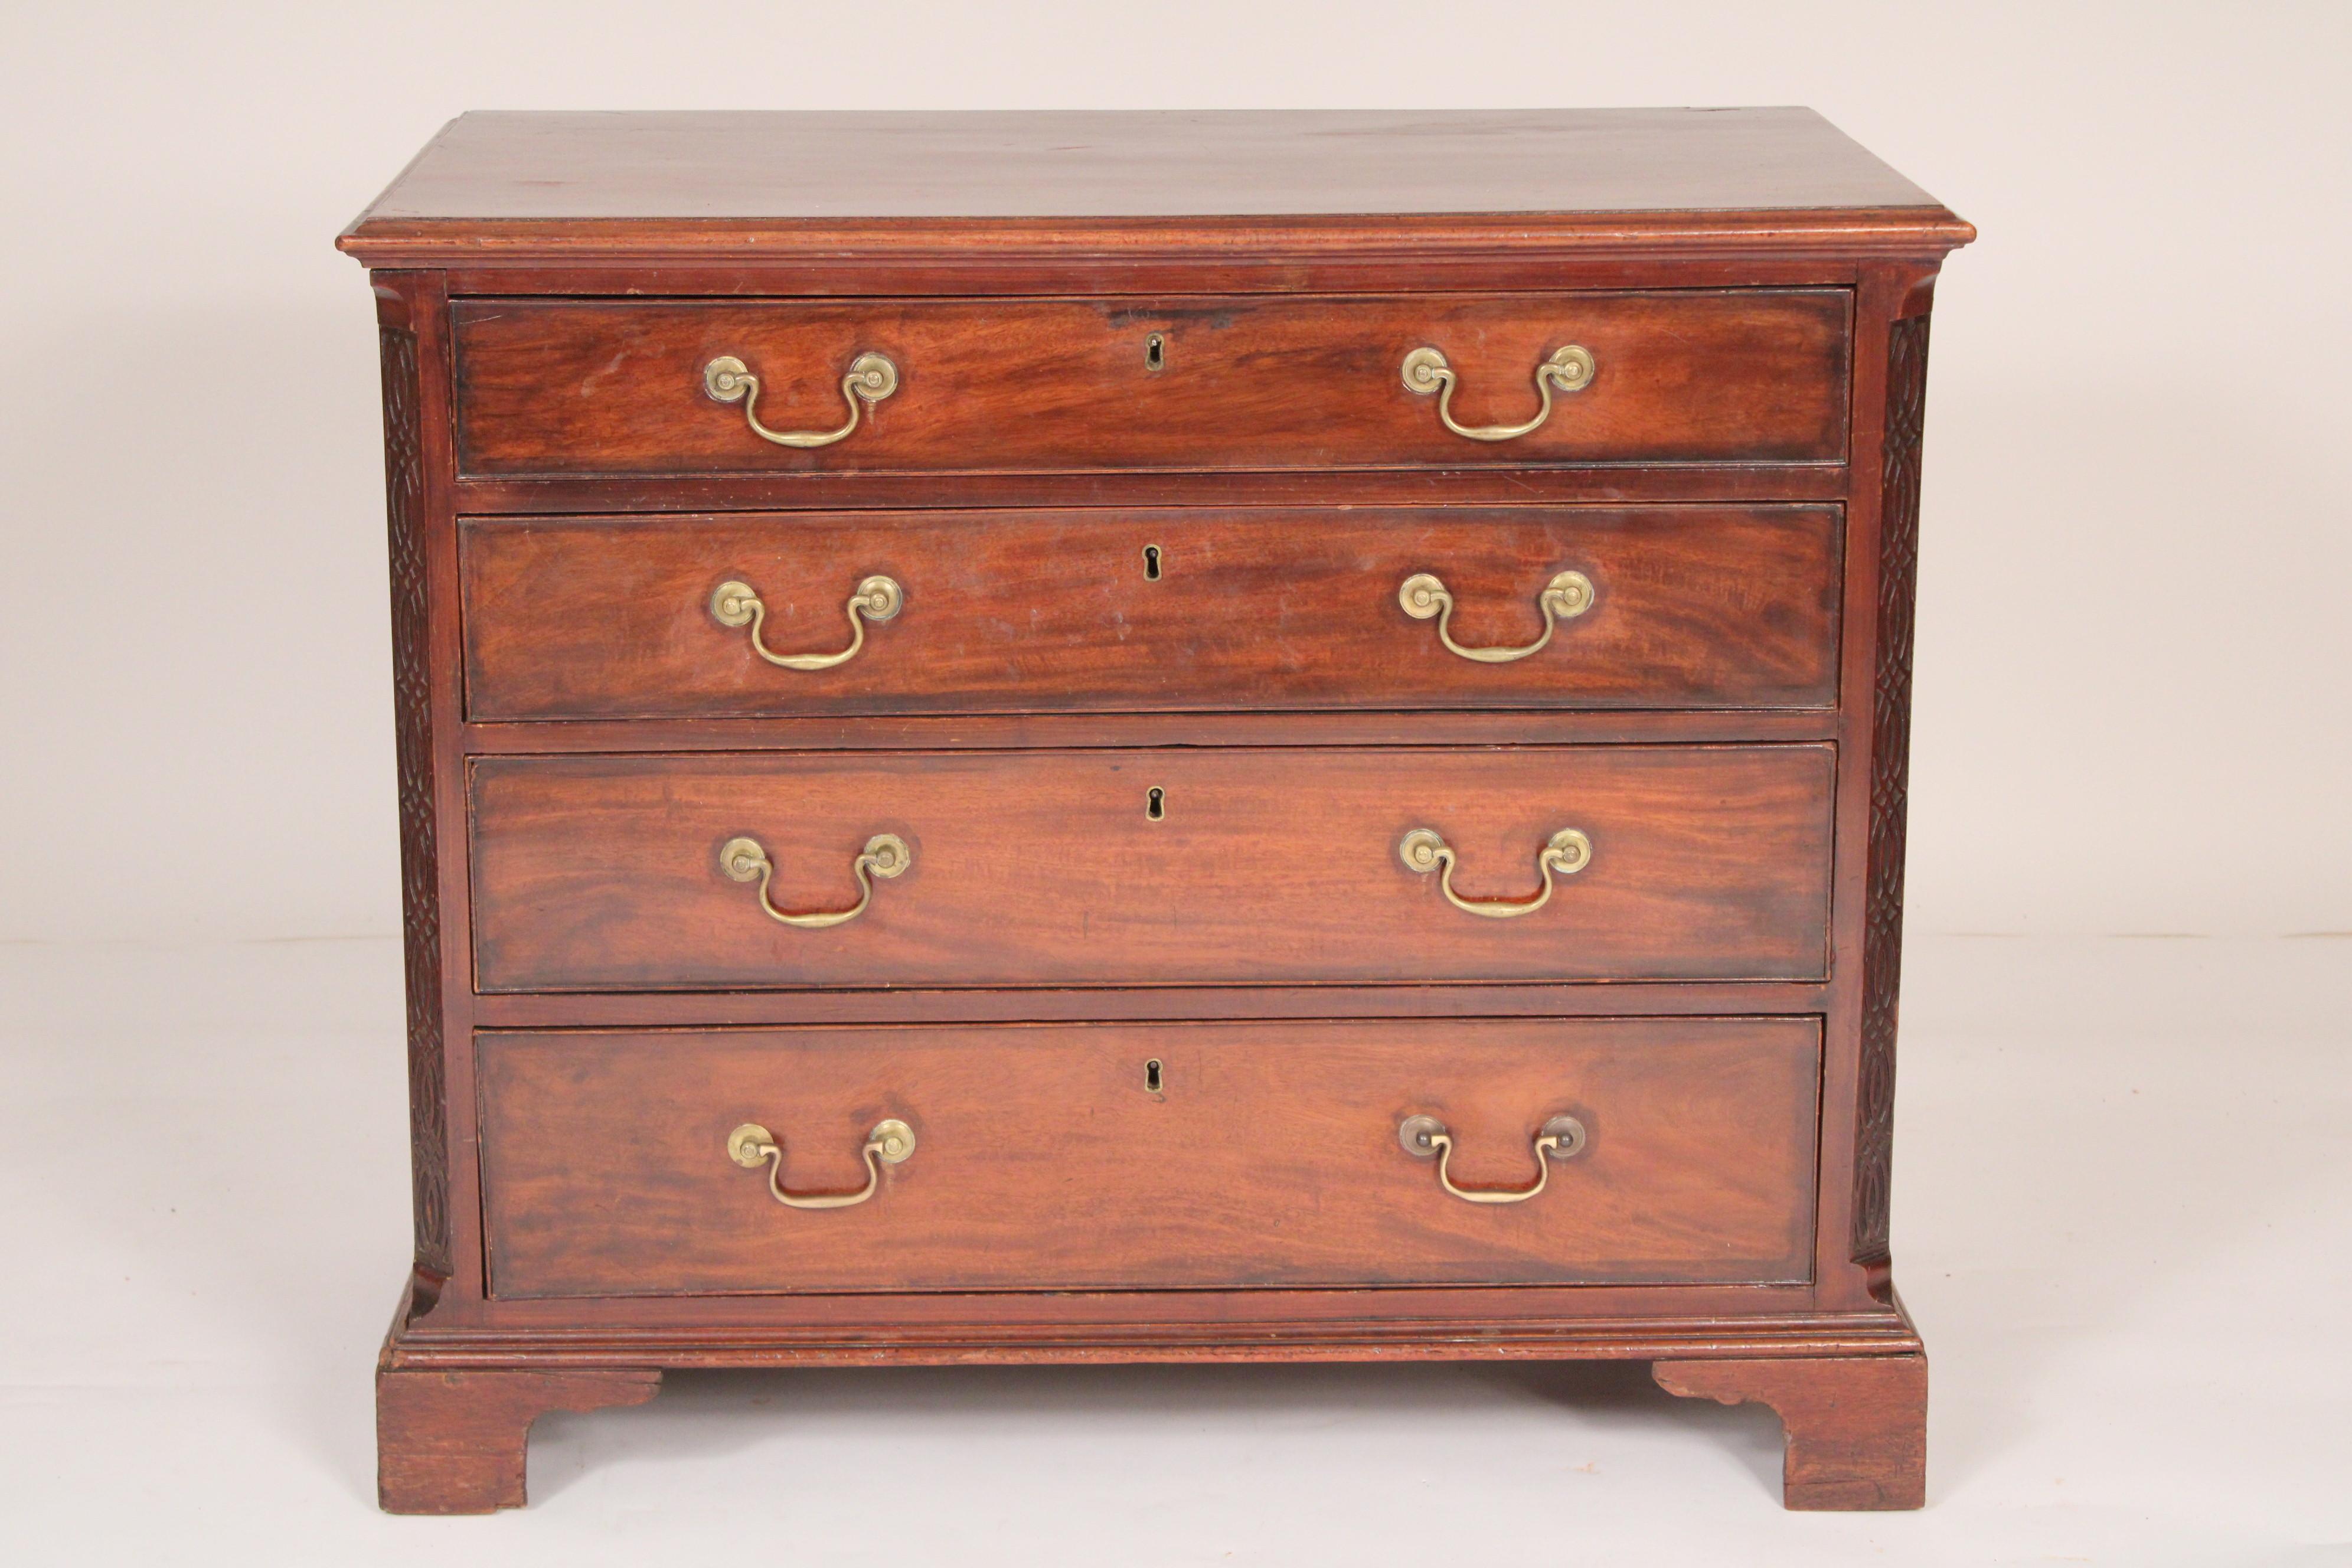 George II mahogany bachelors chest, 18th century. With a slightly over hanging rectangular top, the top drawer has a felt lined writing surface that slides back for storage, canted corners with Chinese blind fret carving, four graduated drawers